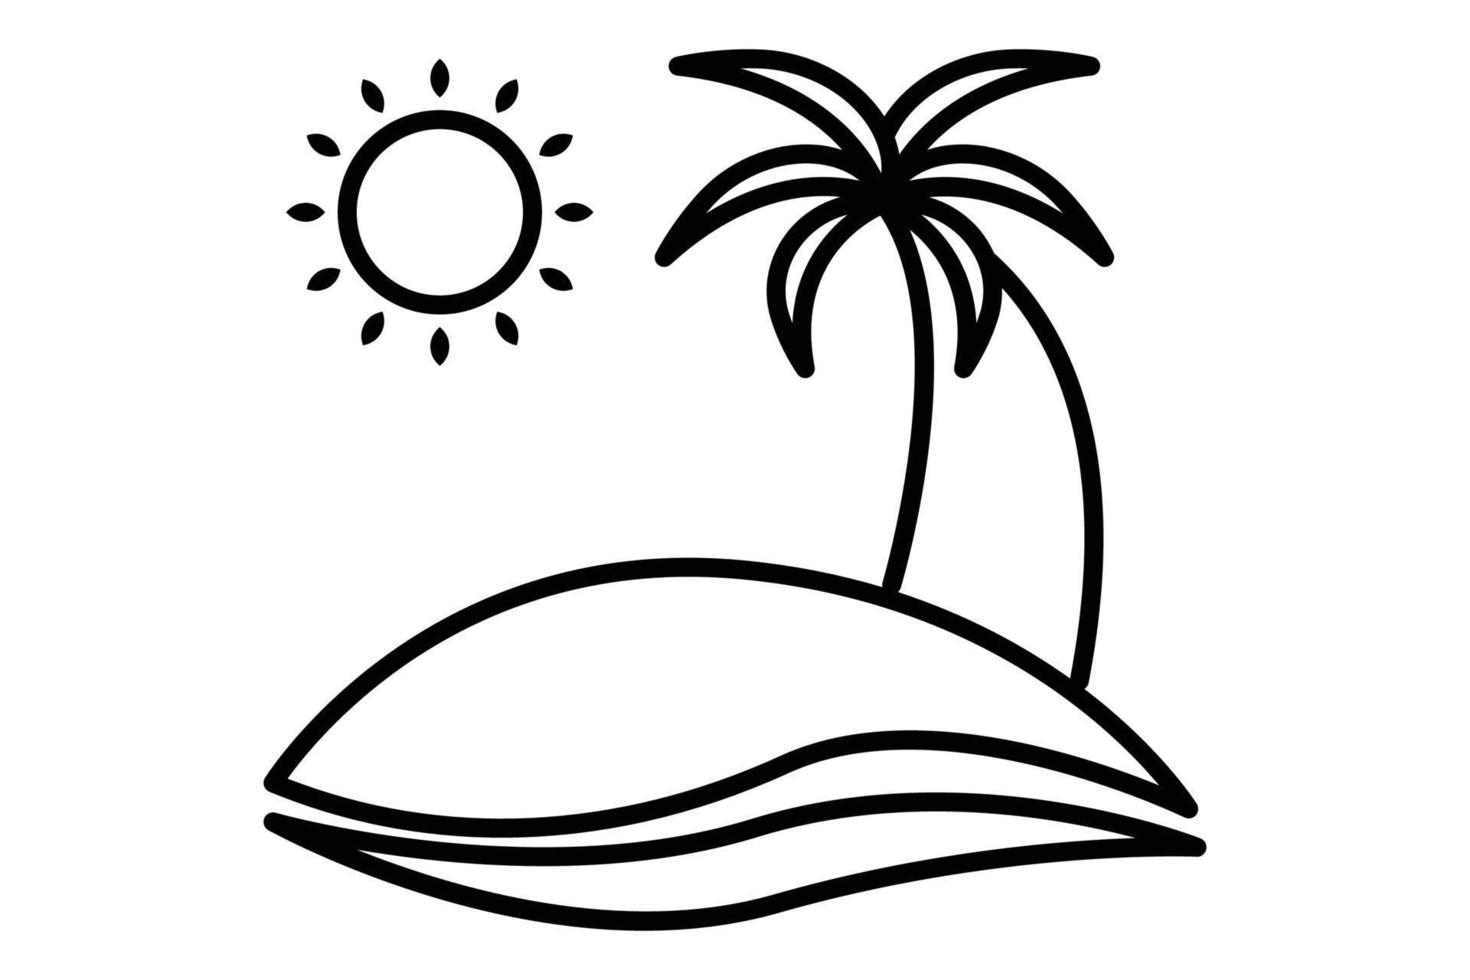 Beach icon illustration. Palm tree icon with sun. icon related to holiday. Line icon style. Simple vector design editable